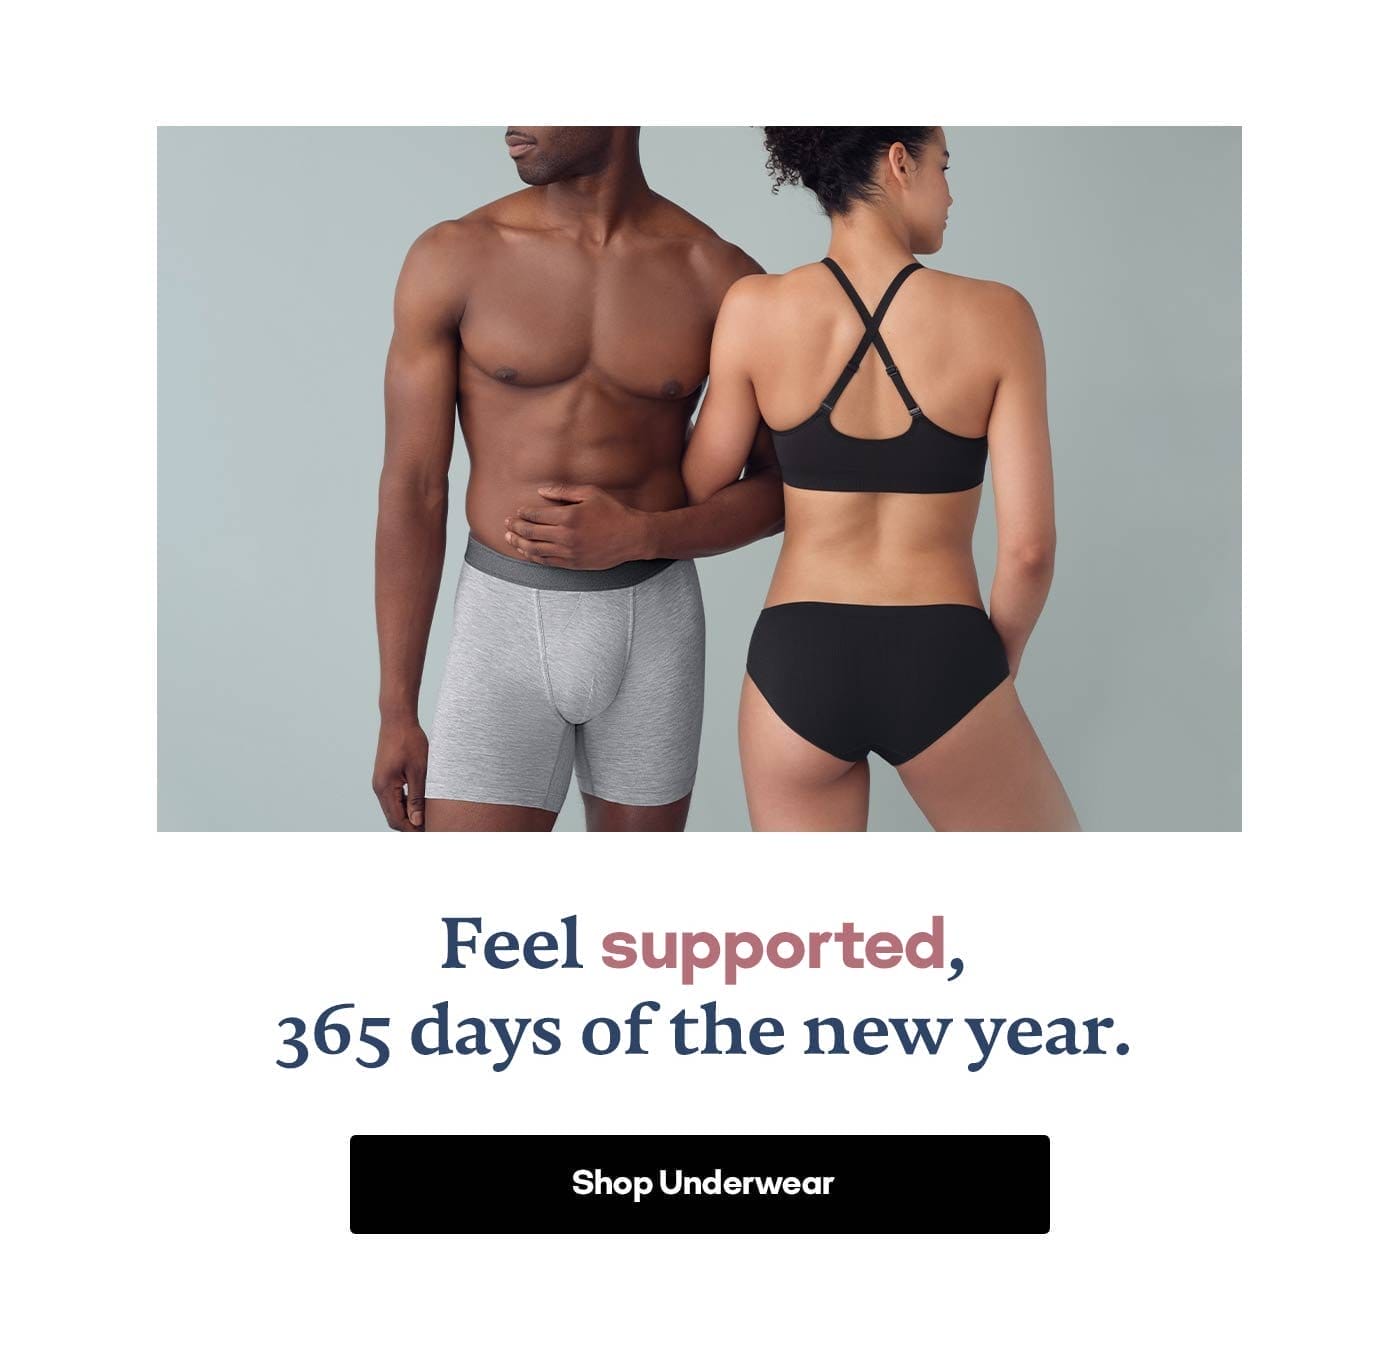 Feel supported, 365 days of the new year. Shop Underwear